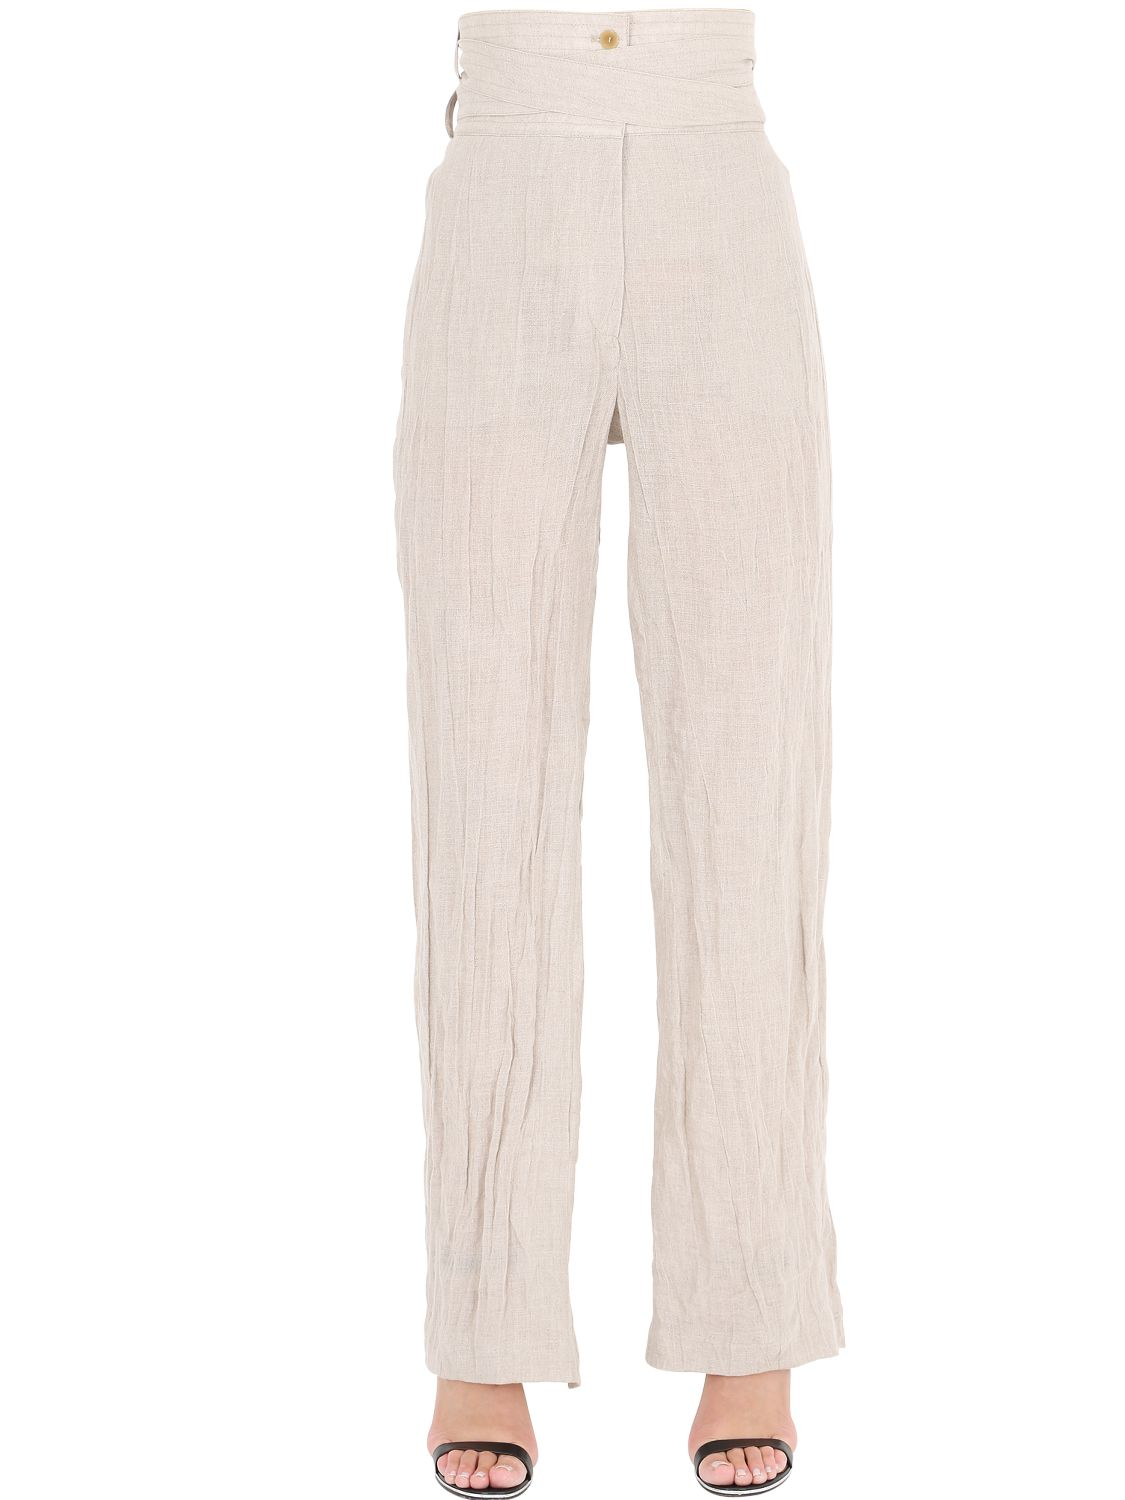 Loewe Linen Pants With Wrinkled Effect in Natural | Lyst